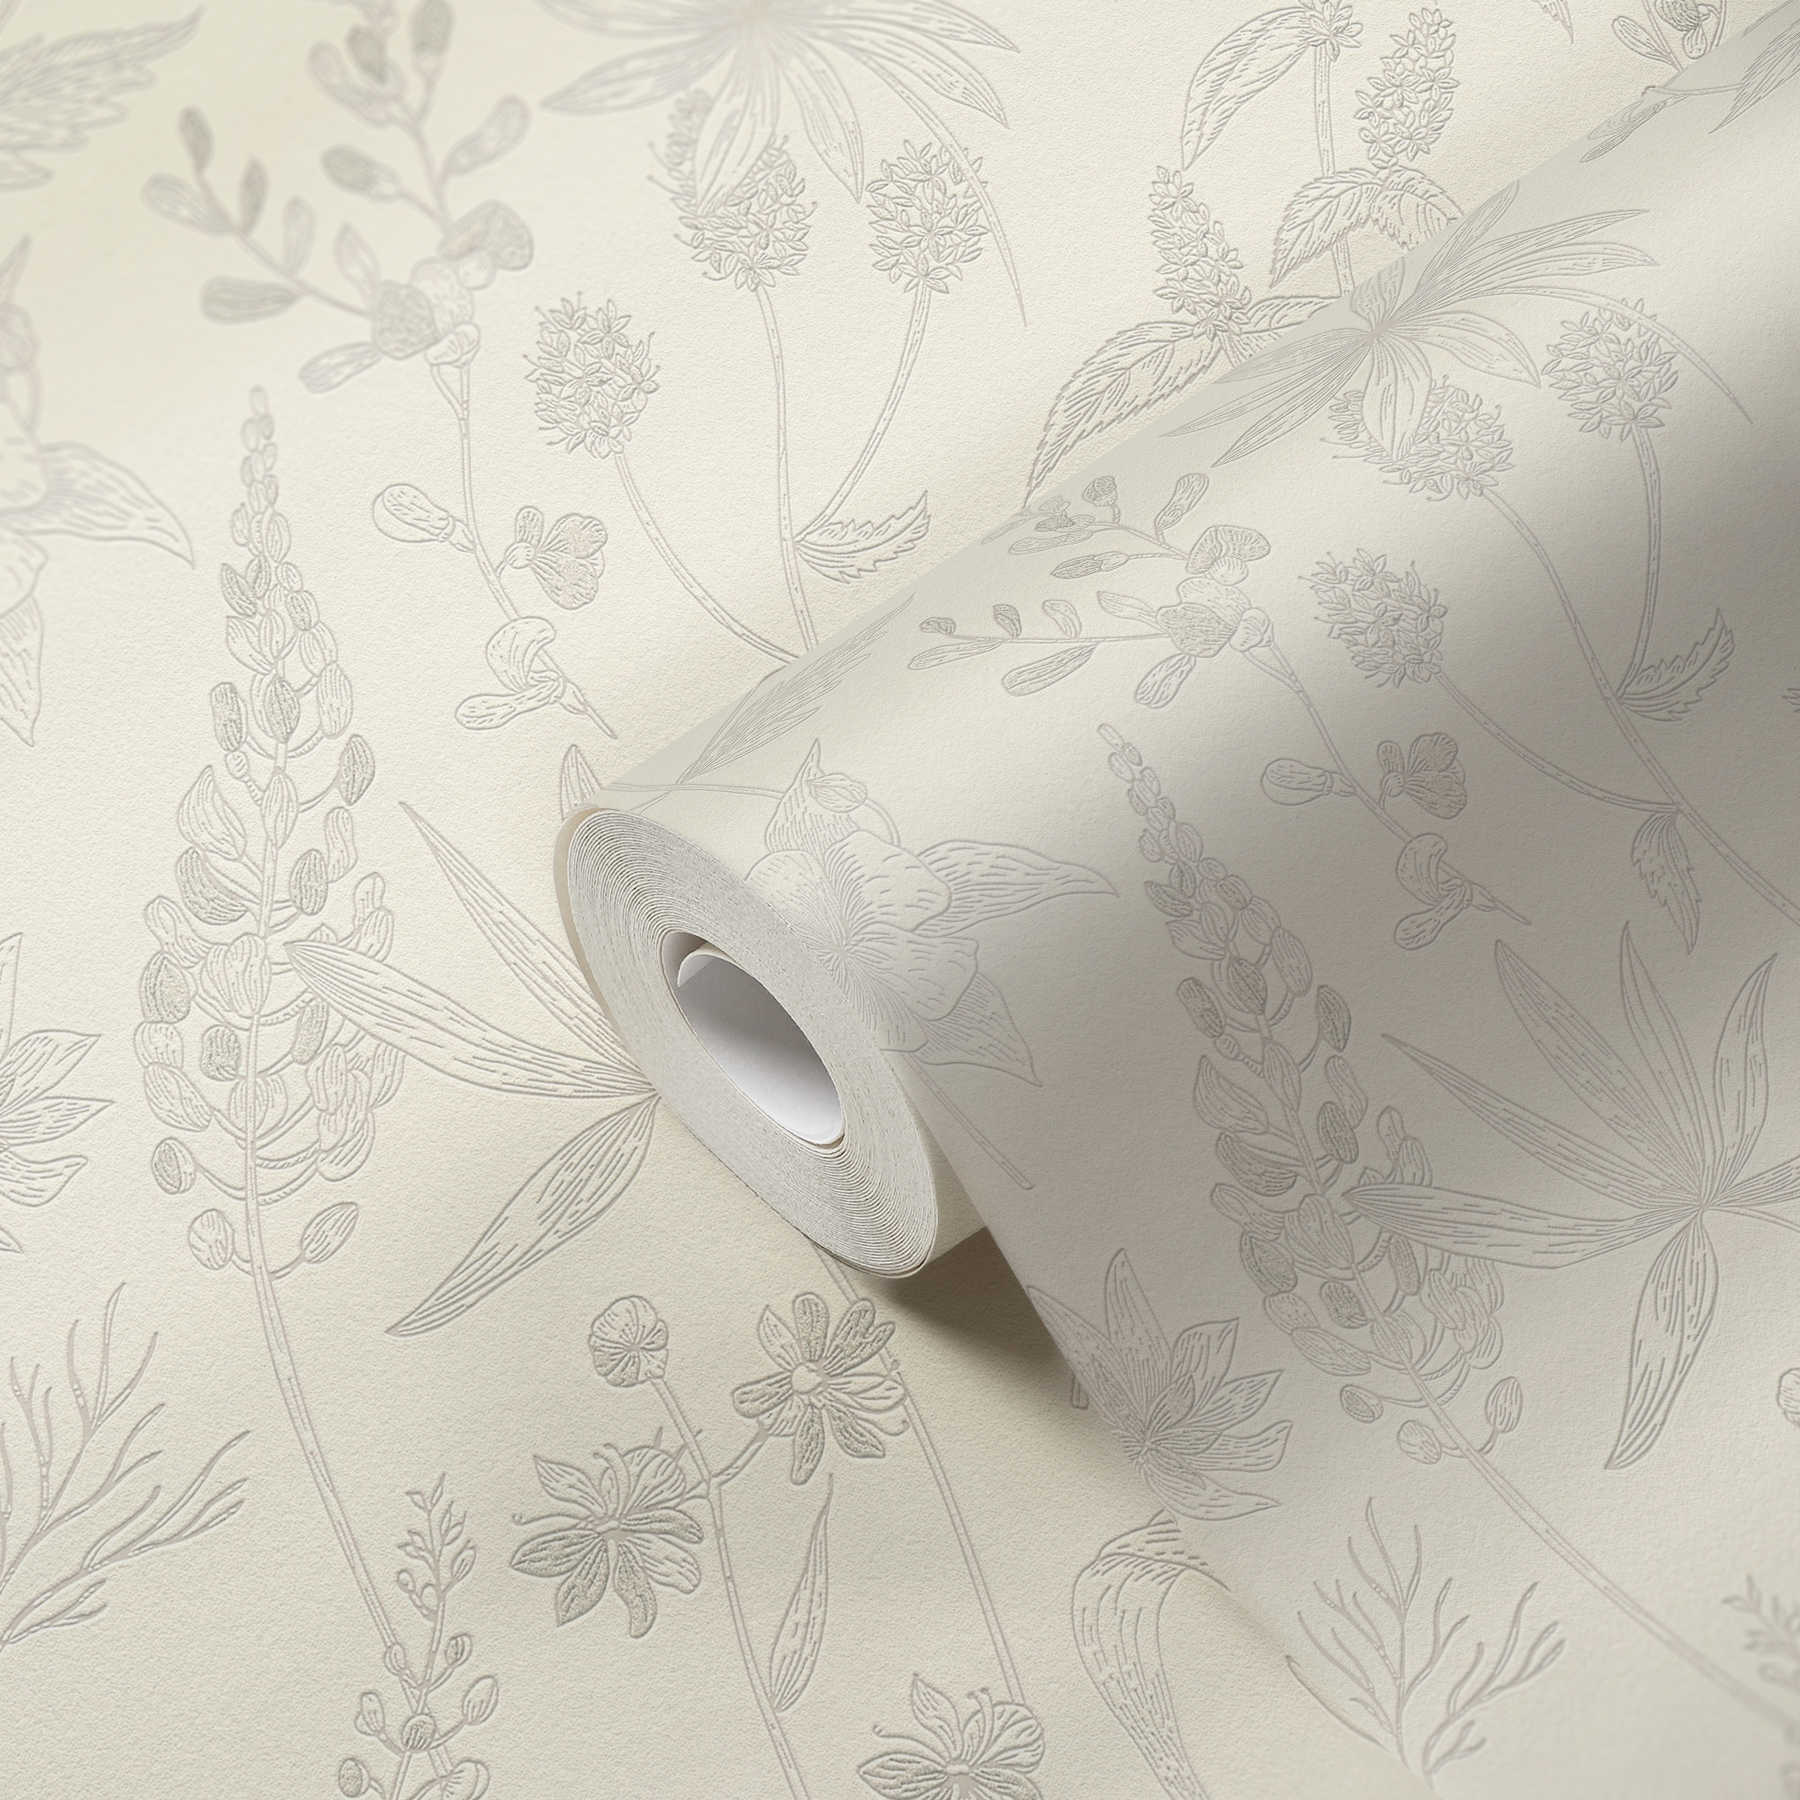             Non-woven wallpaper with floral pattern and metallic accent - beige, silver, white
        